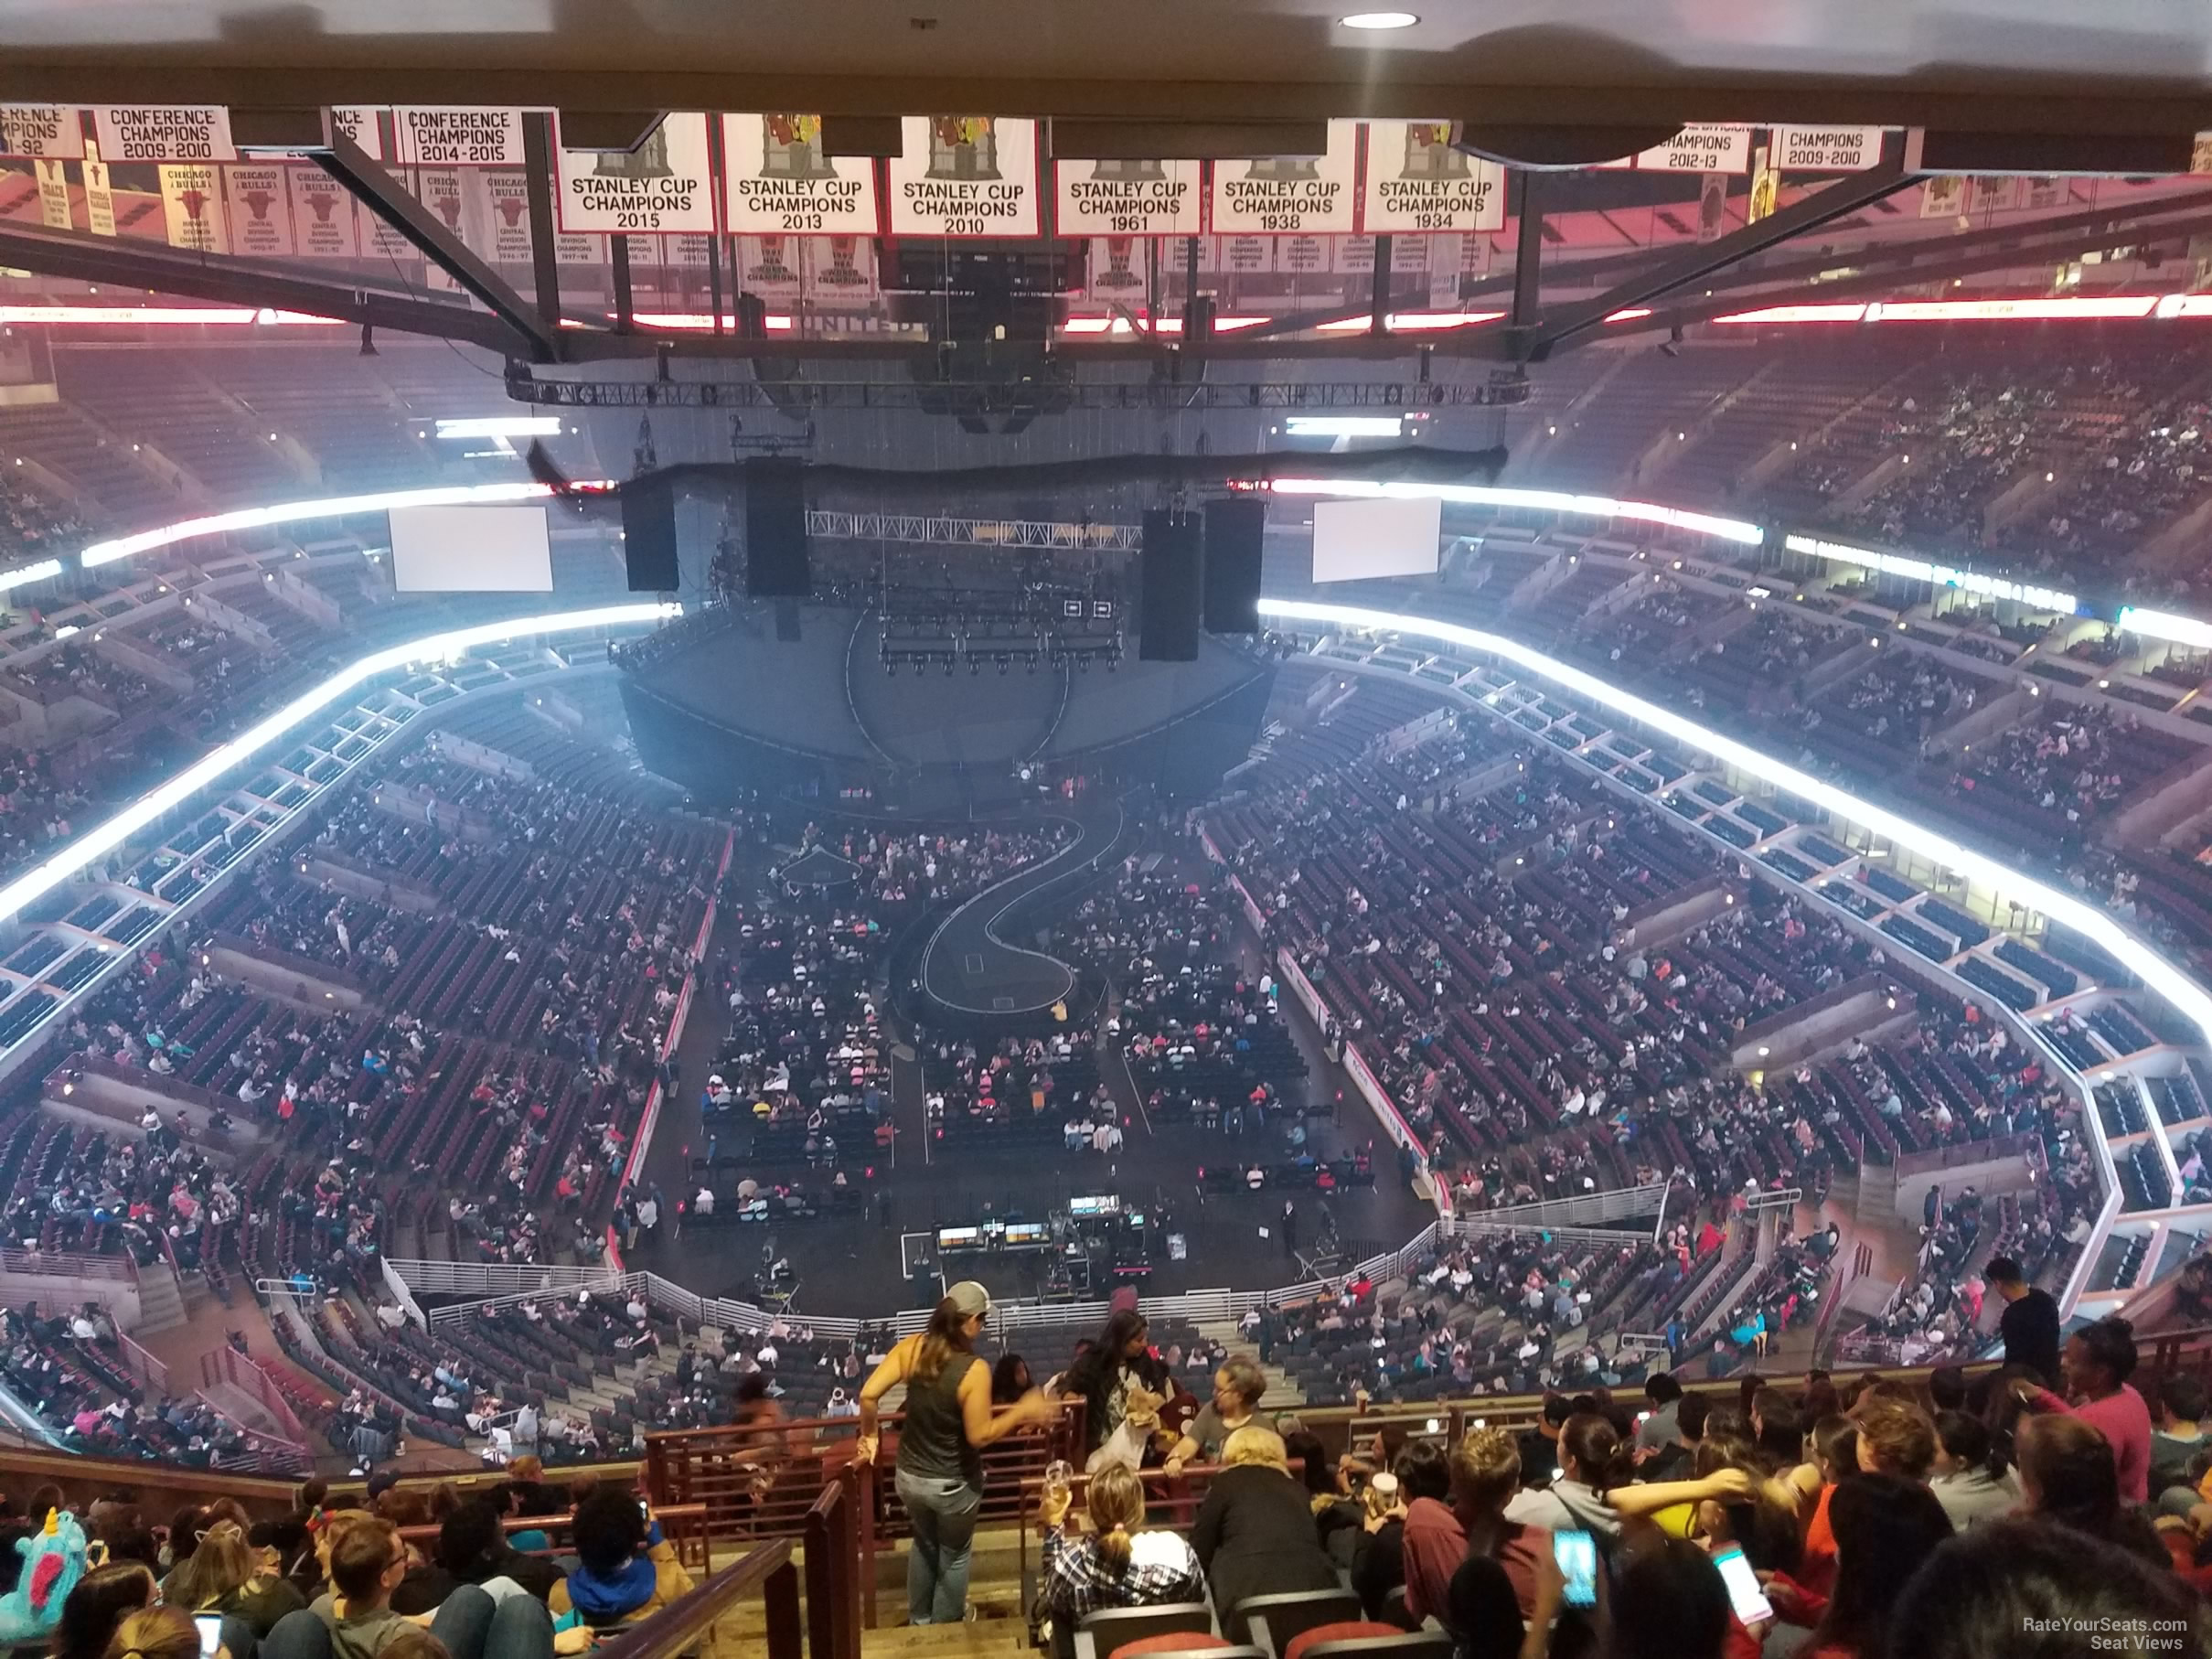 section 309, row 17 seat view  for concert - united center